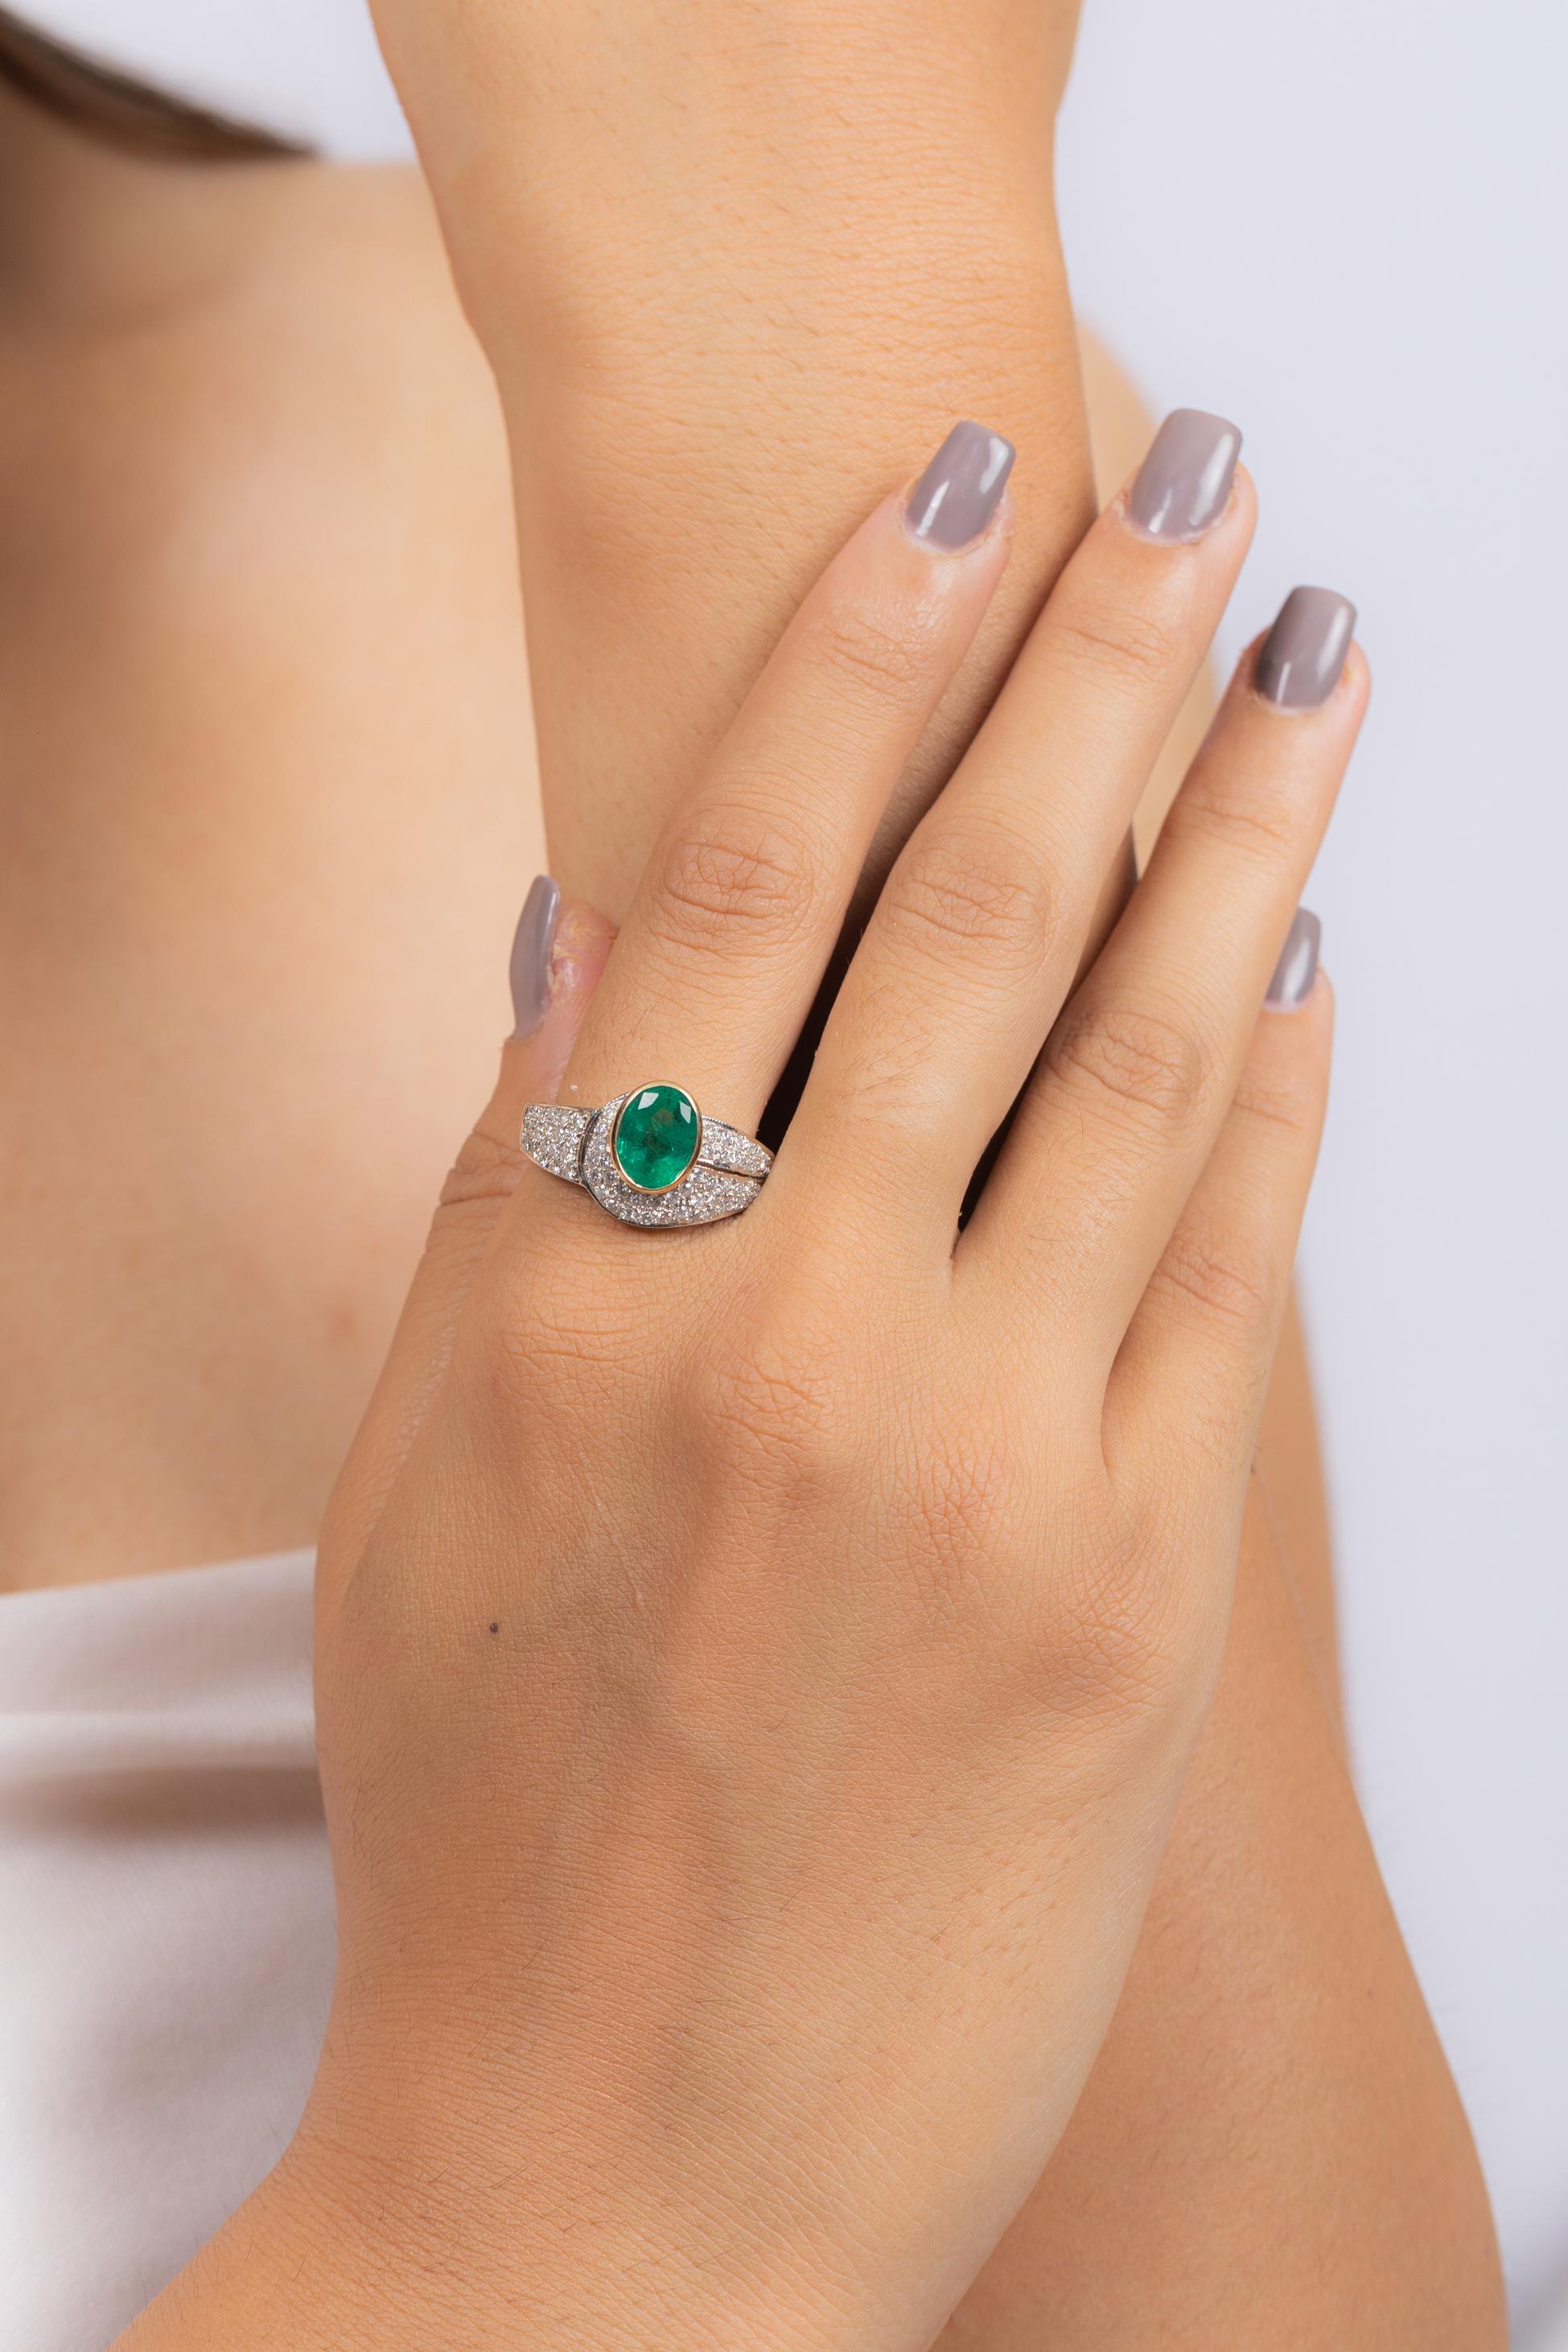 For Sale:  2.45 Carat Emerald and Diamond Ring in 18K White Gold  12